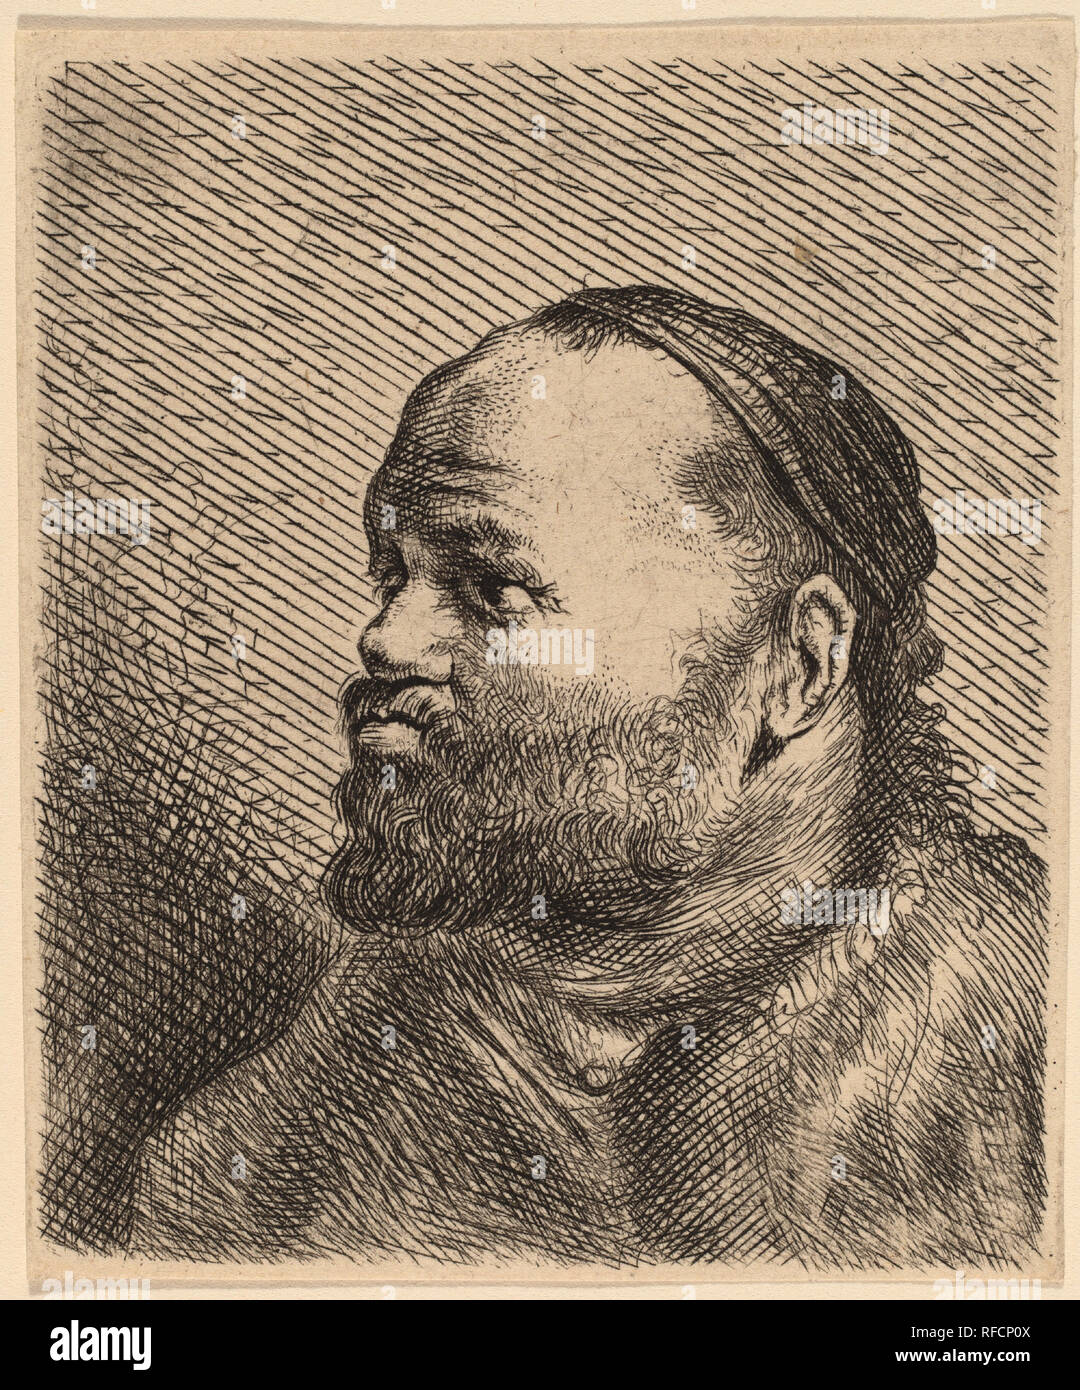 Bust of a Man with Thick Lips. Medium: etching. Museum: National Gallery of Art, Washington DC. Author: Lievens, Jan. Stock Photo